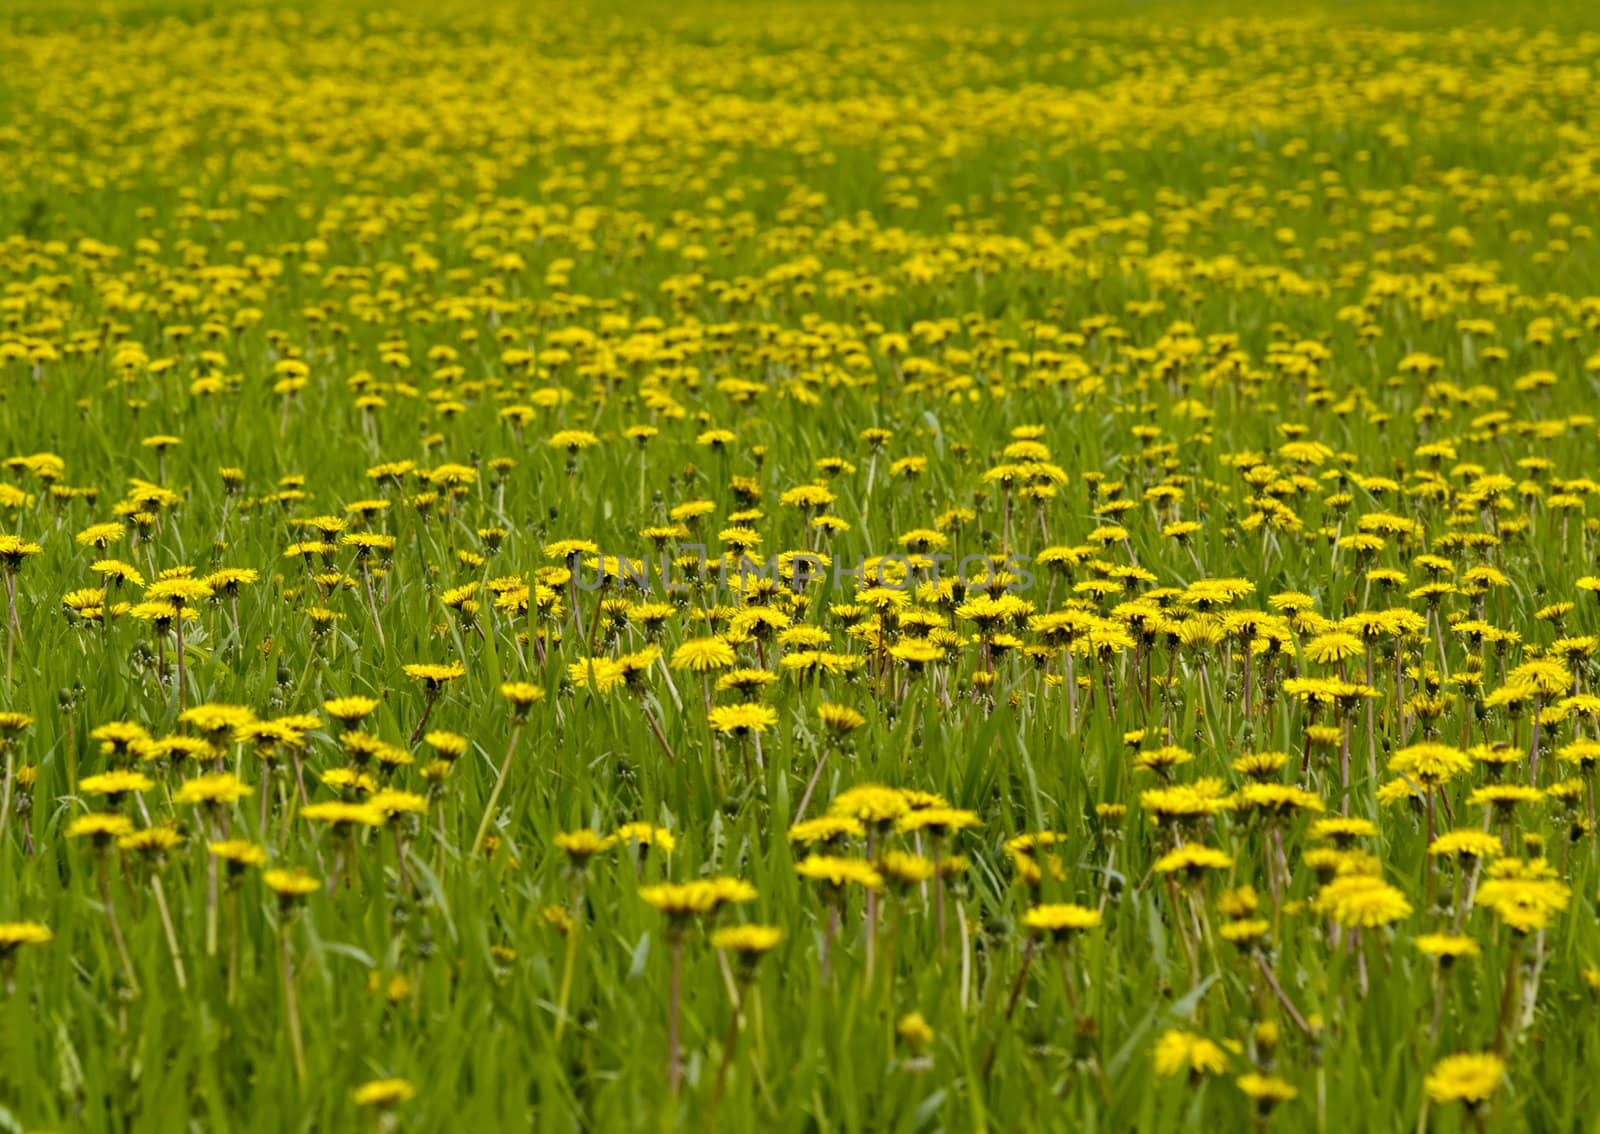 The big meadow of blossoming yellow dandelions